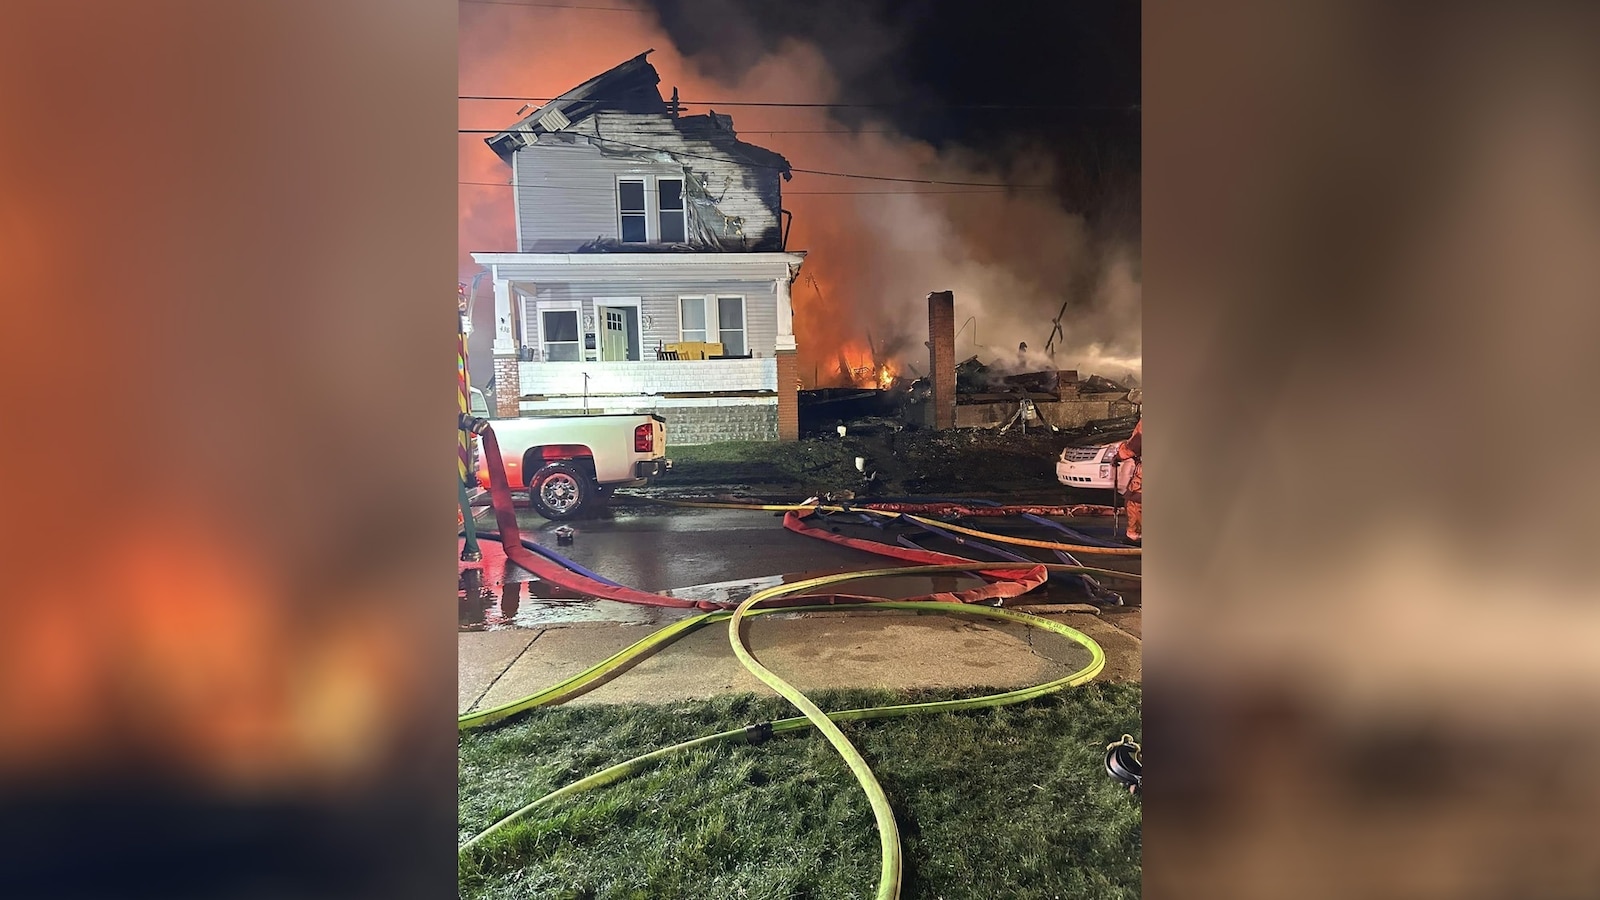 4 young kids, 1 adult killed in devastating house fire